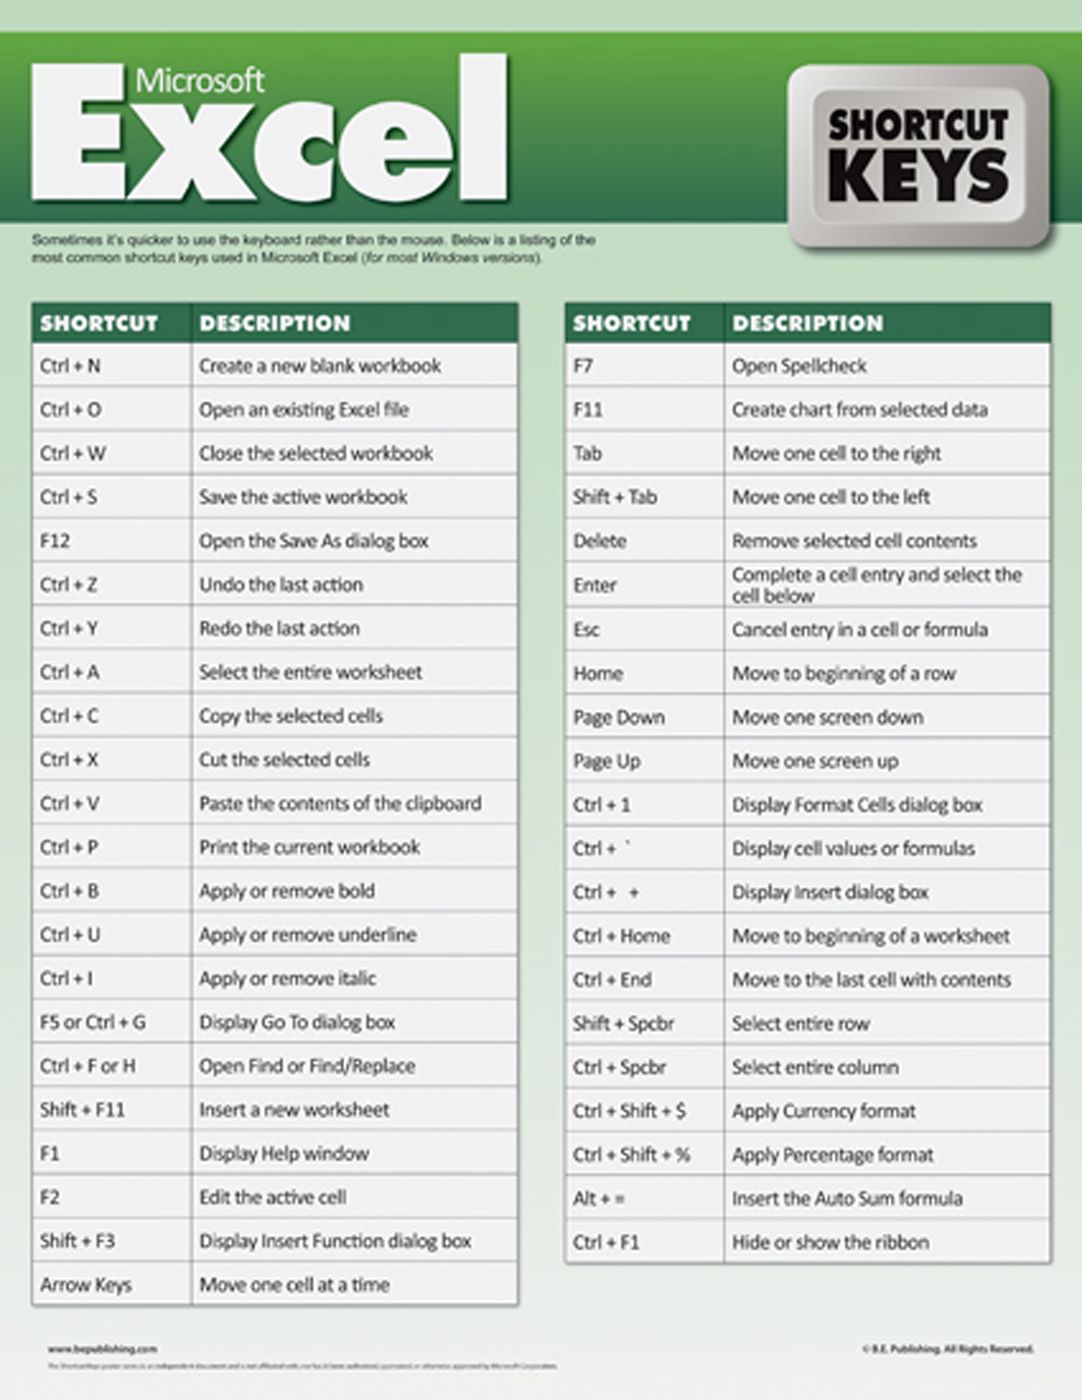 keyboard shortcuts for excel 365